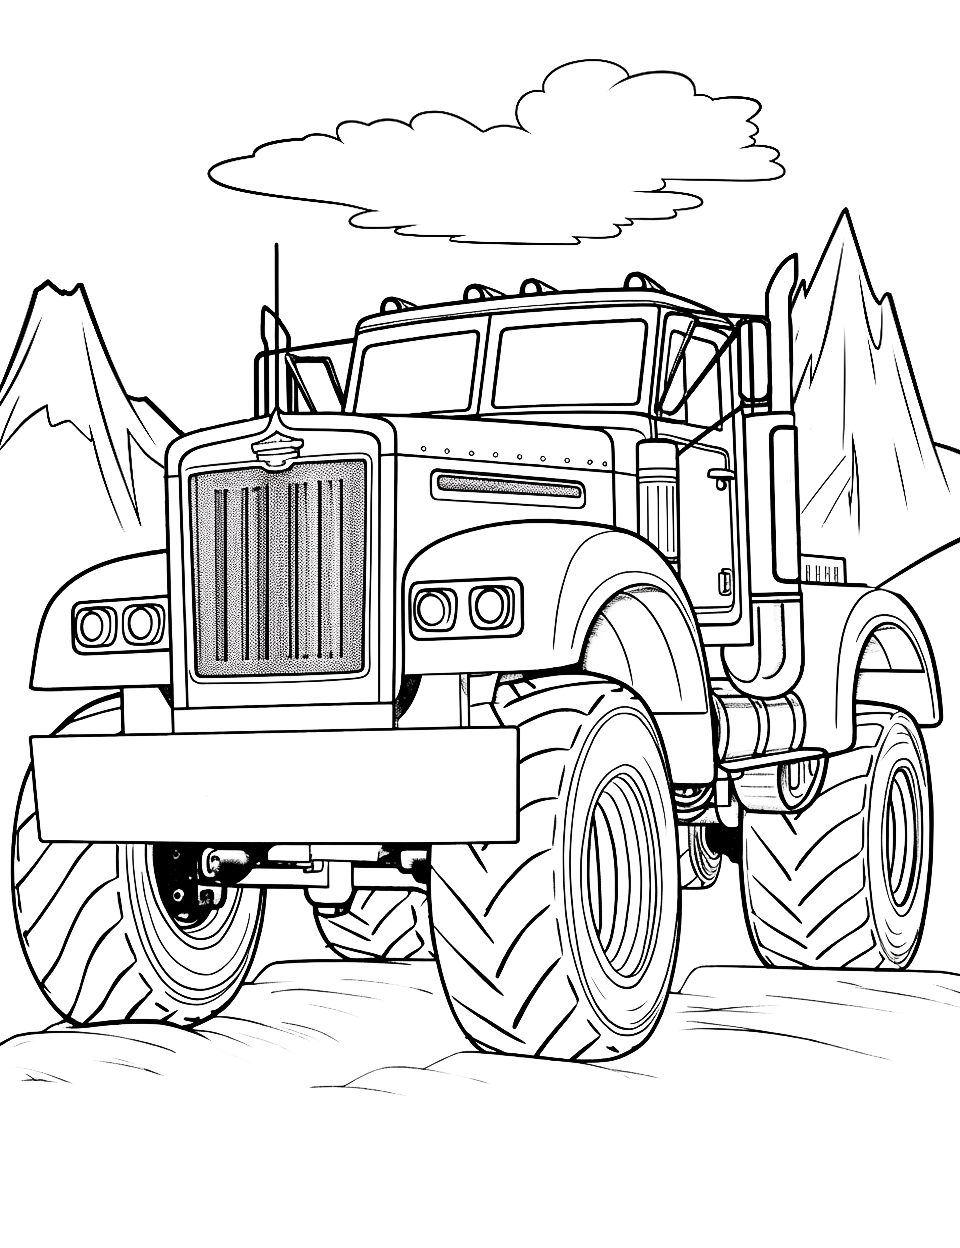 Monster truck coloring pages free printable sheets